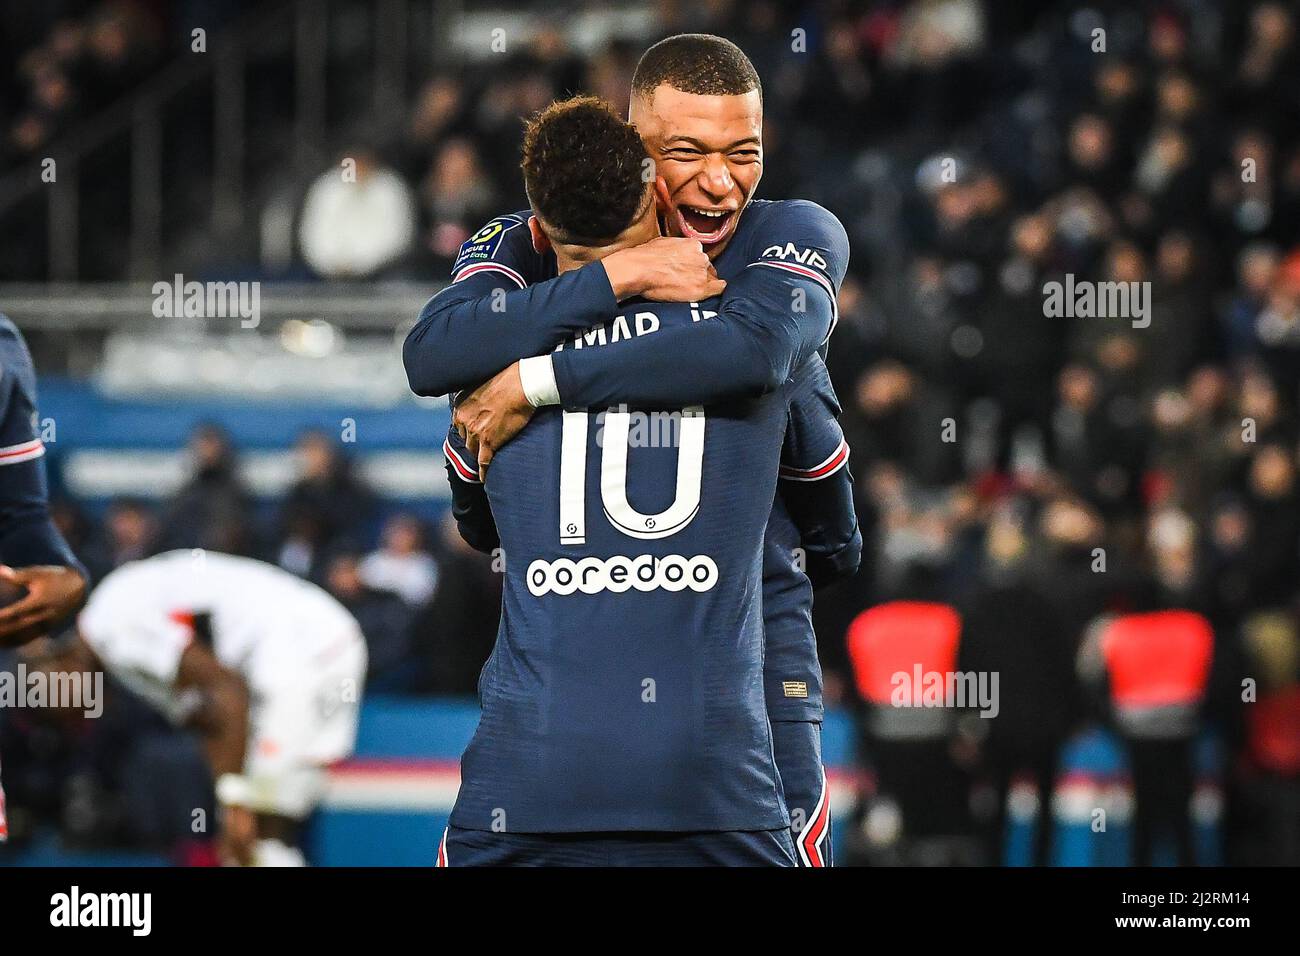 Neymar Jr Of Psg Celebrate His Goal With Kylian Mbappe Of Psg During The French Championship Ligue 1 Football Match Between Paris Saint Germain And Fc Lorient On April 3 22 At Parc